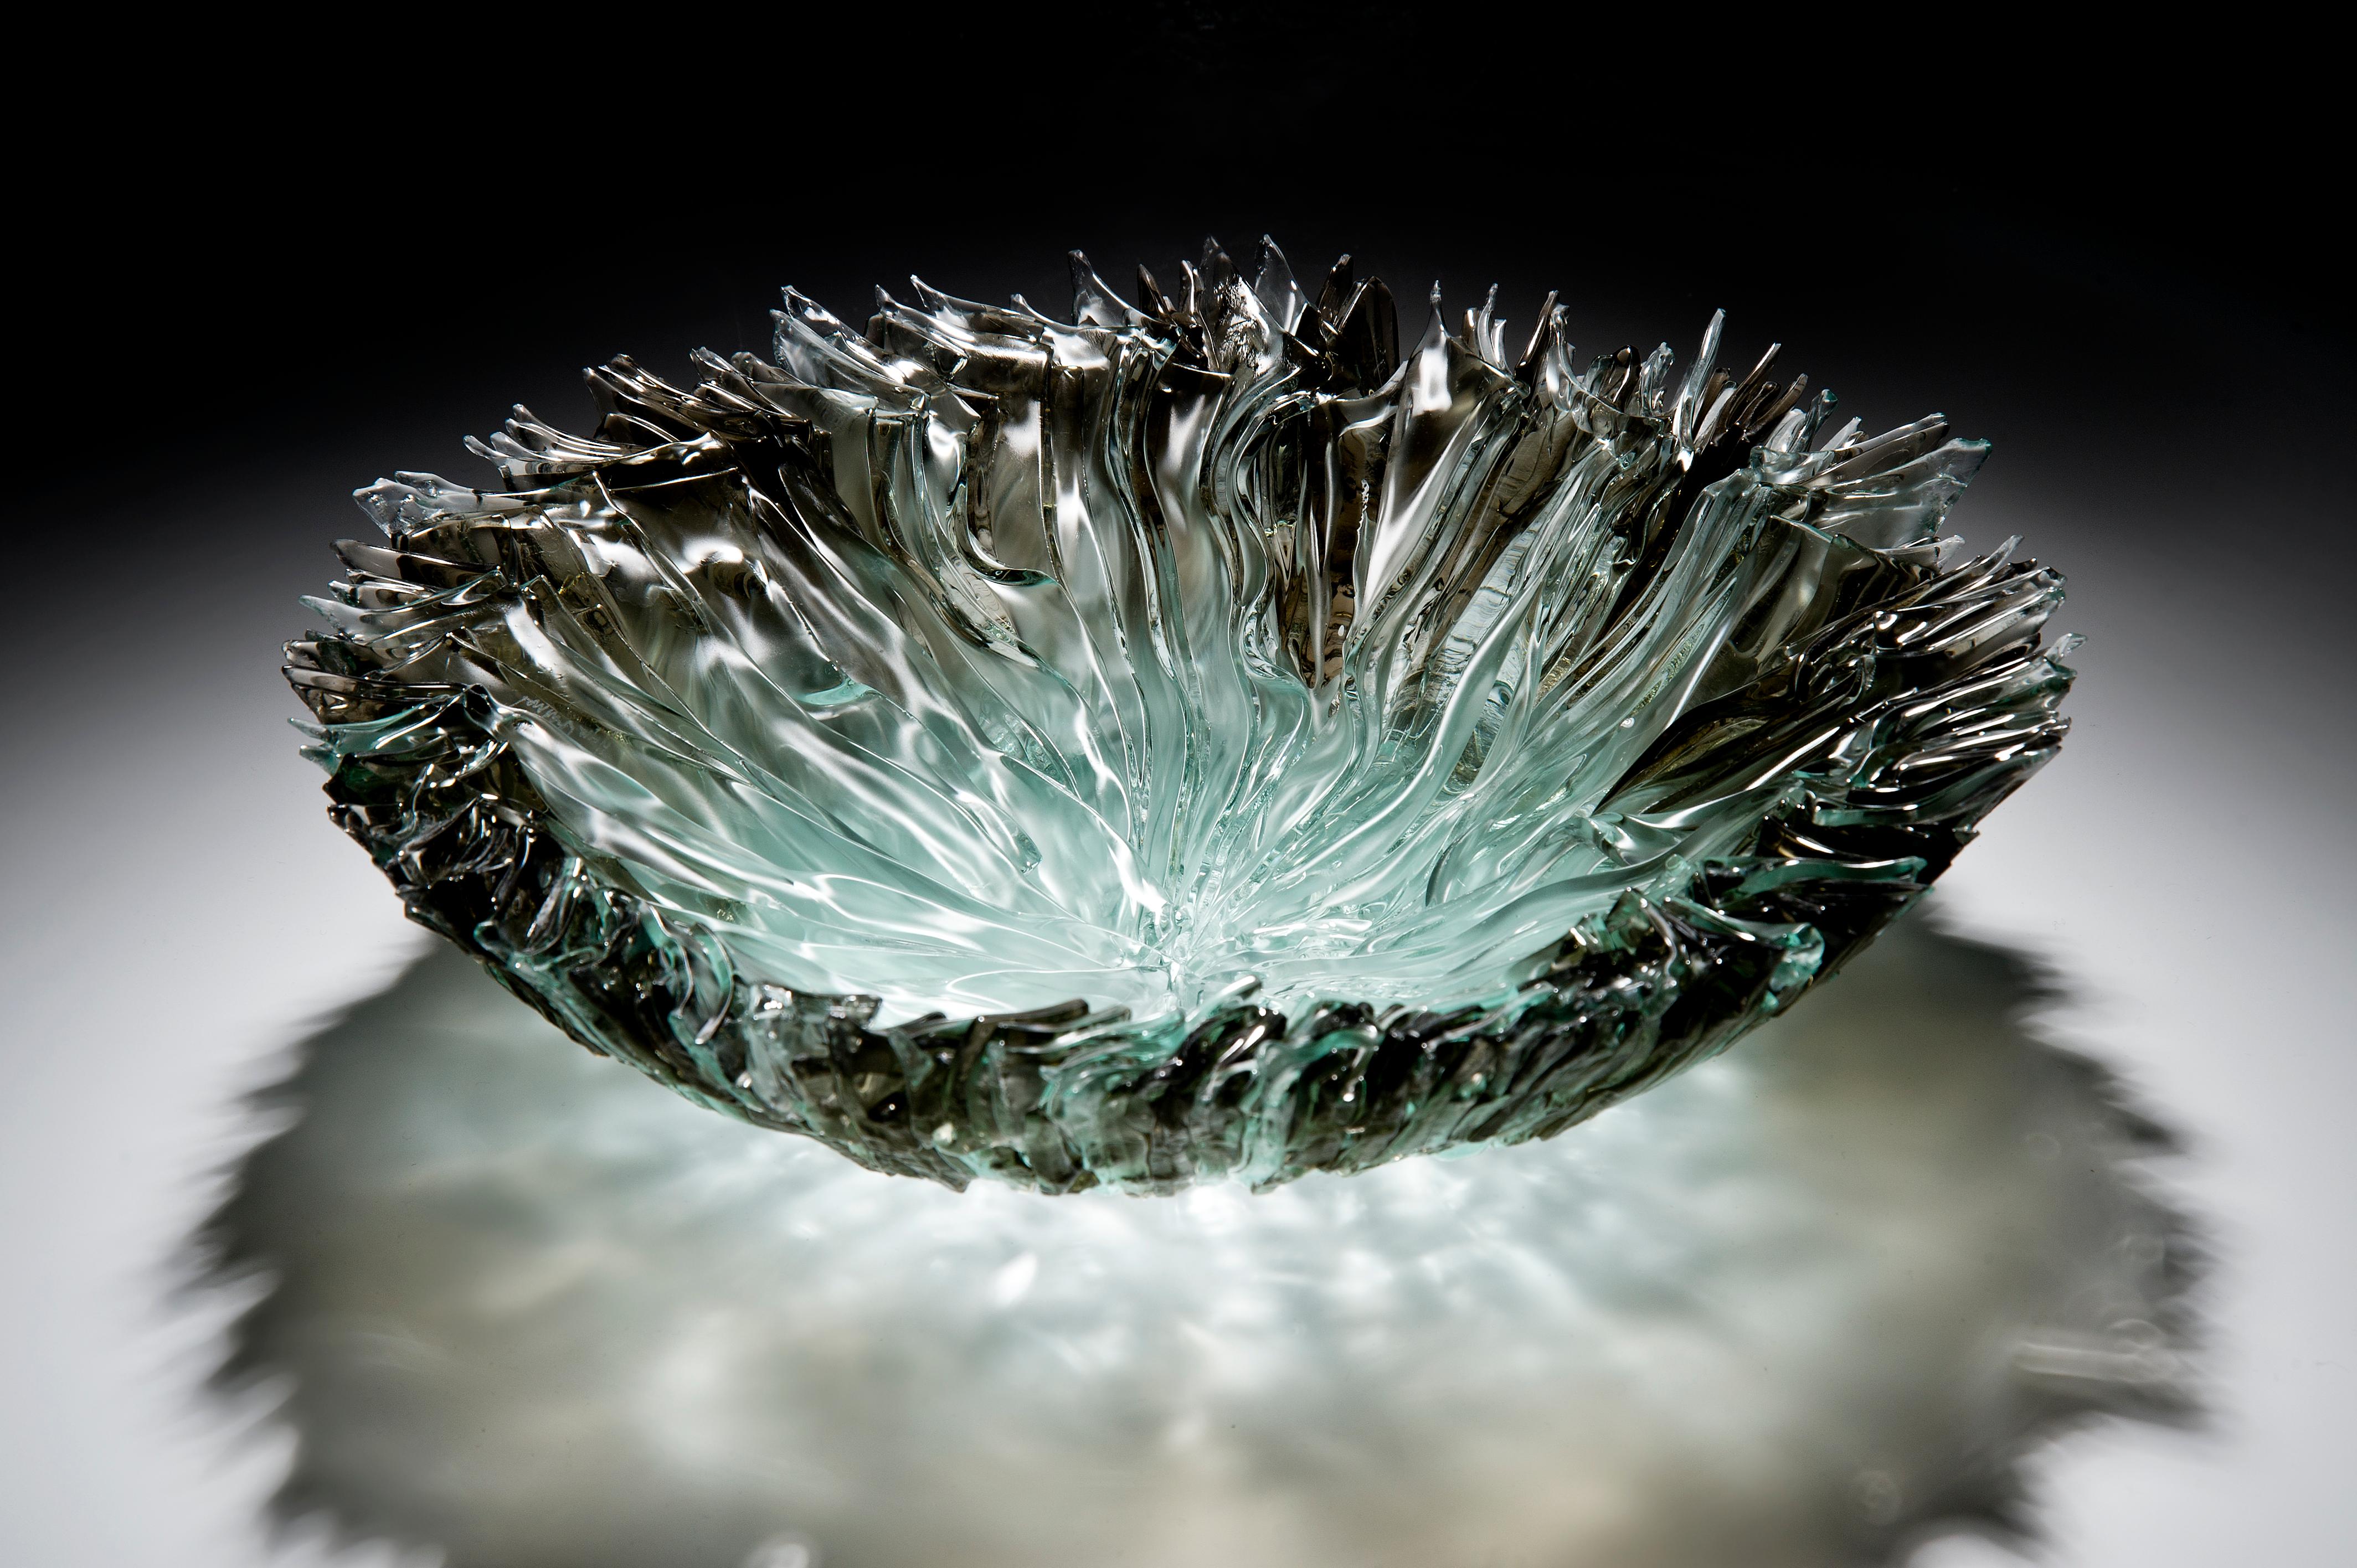 Contemporary Bloom Bowl in Bronze, a bronze and clear glass centrepiece by Wayne Charmer